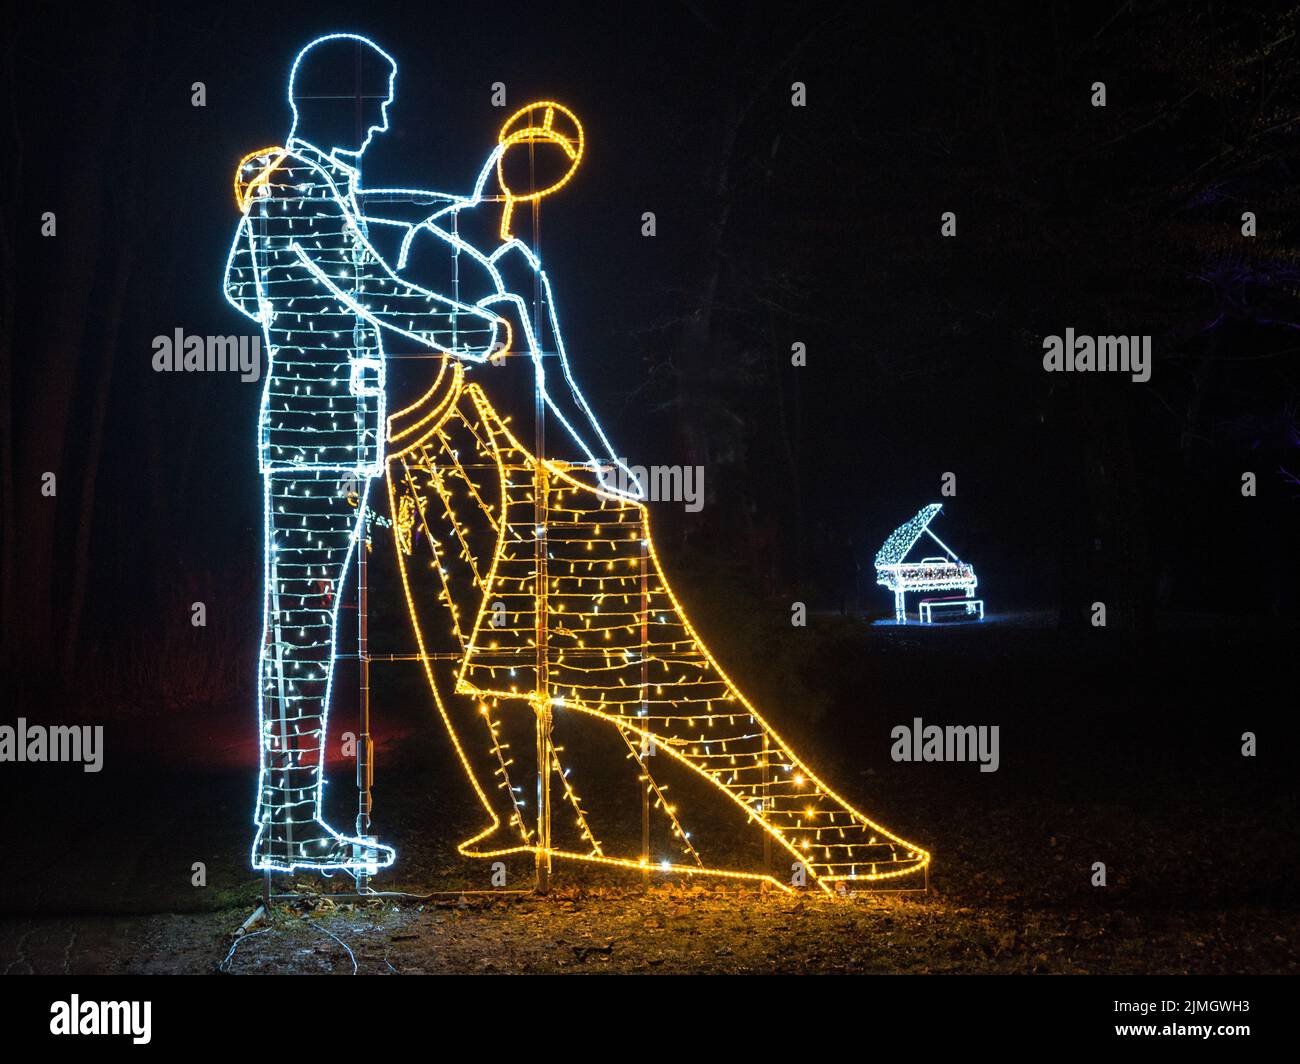 Pair of dancers made of christmas light Stock Photo